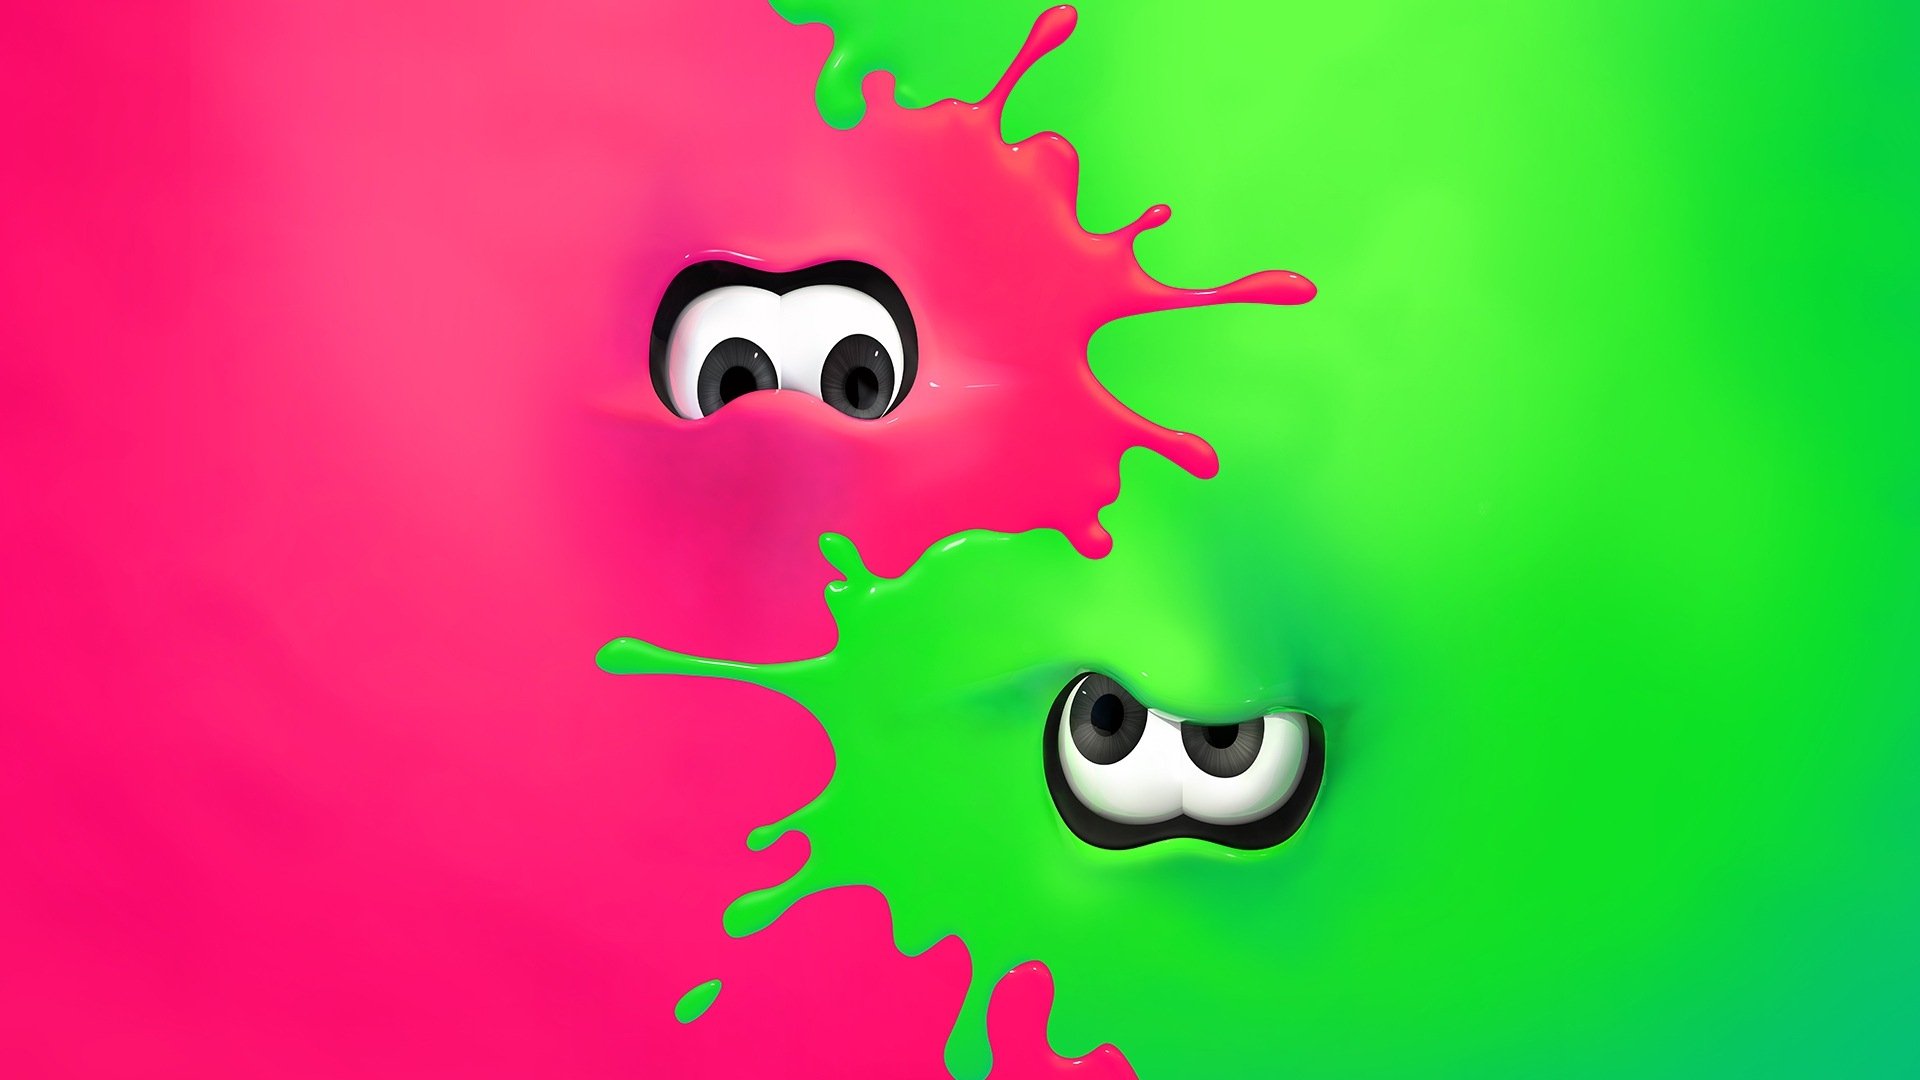 Splatoon 2 Hd Wallpapers Background Images